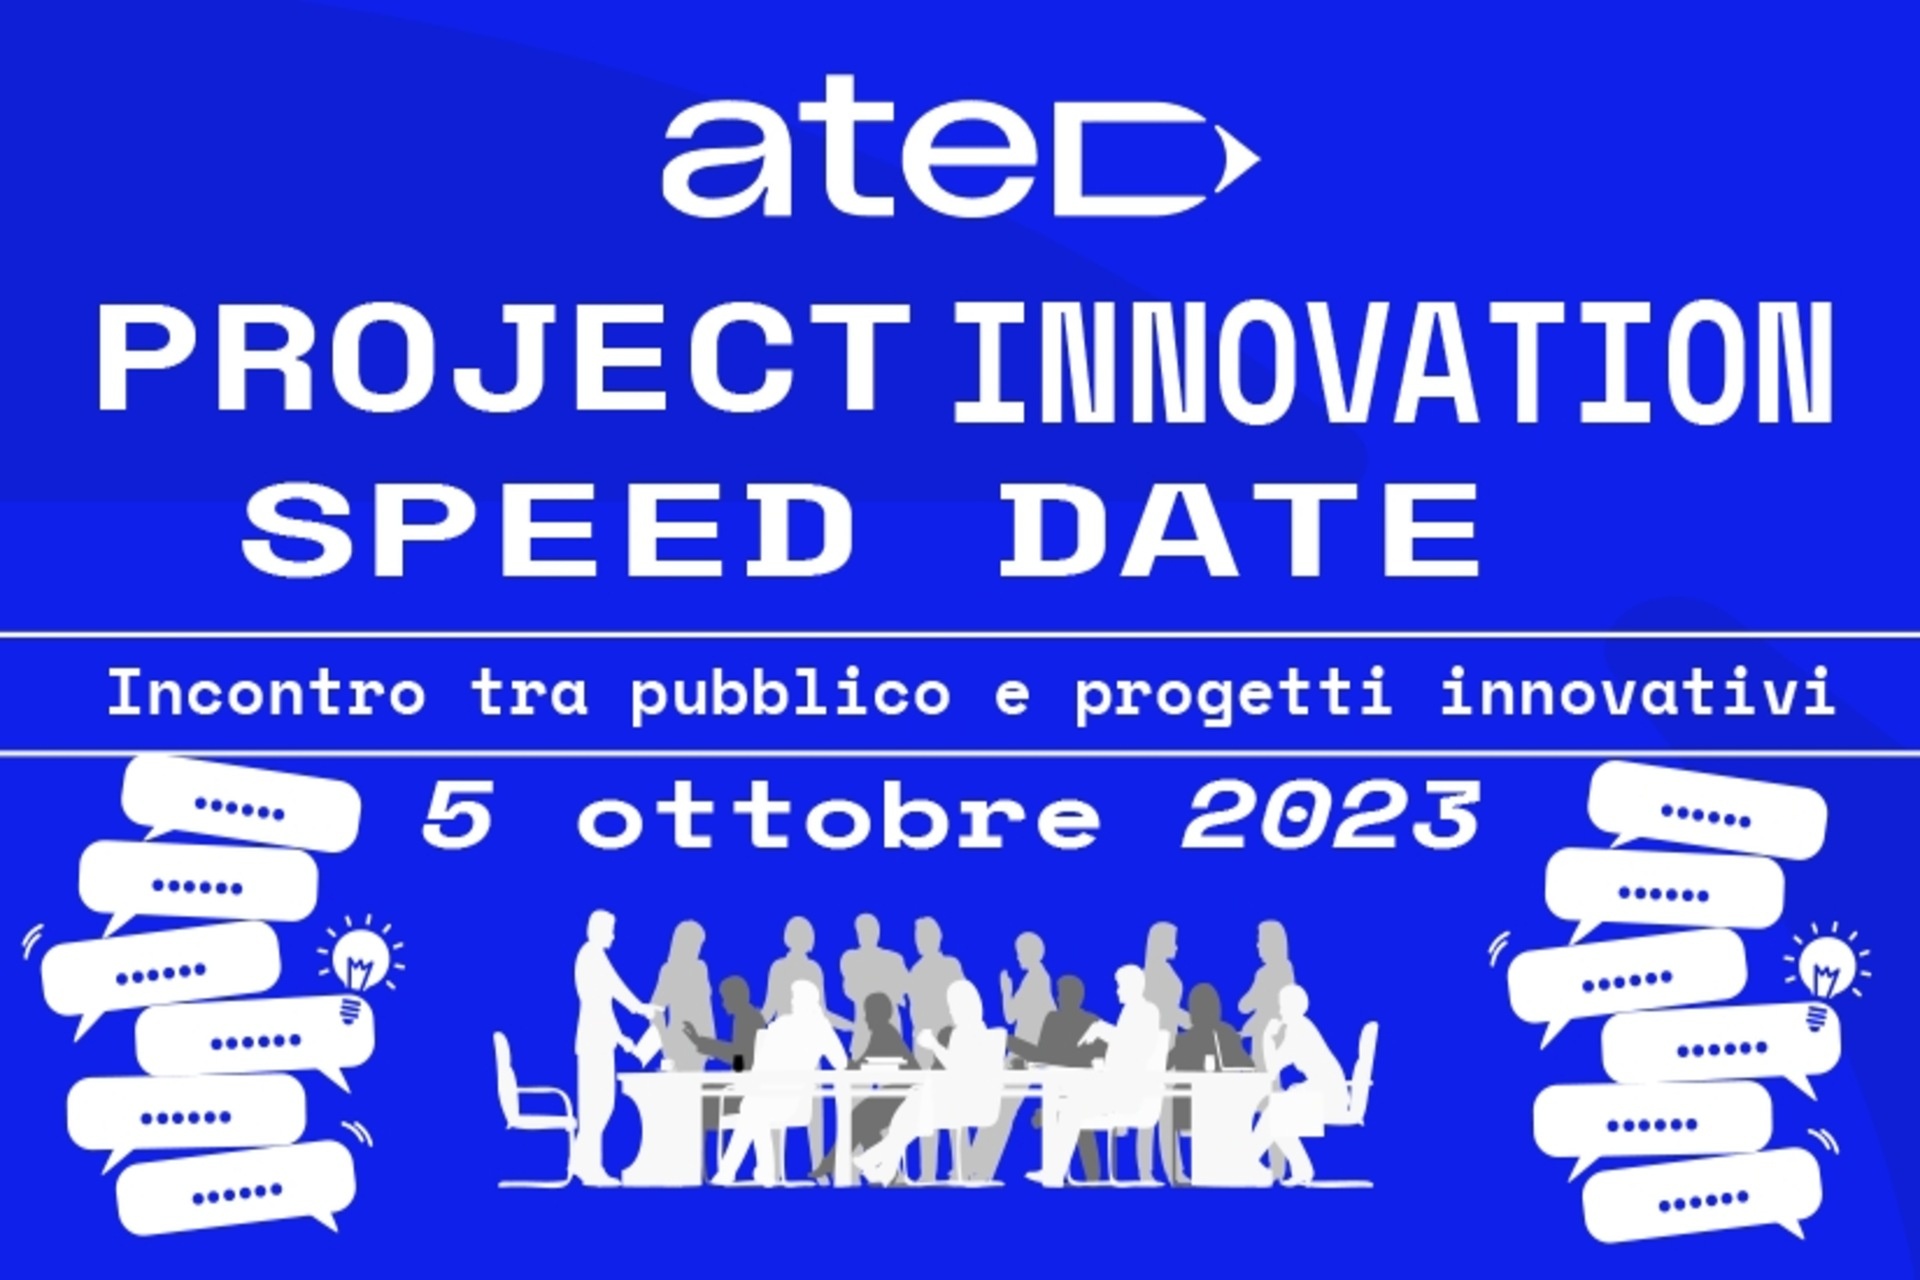 Projekter: plakaten for ATED Project Innovation Speed ​​​​Date